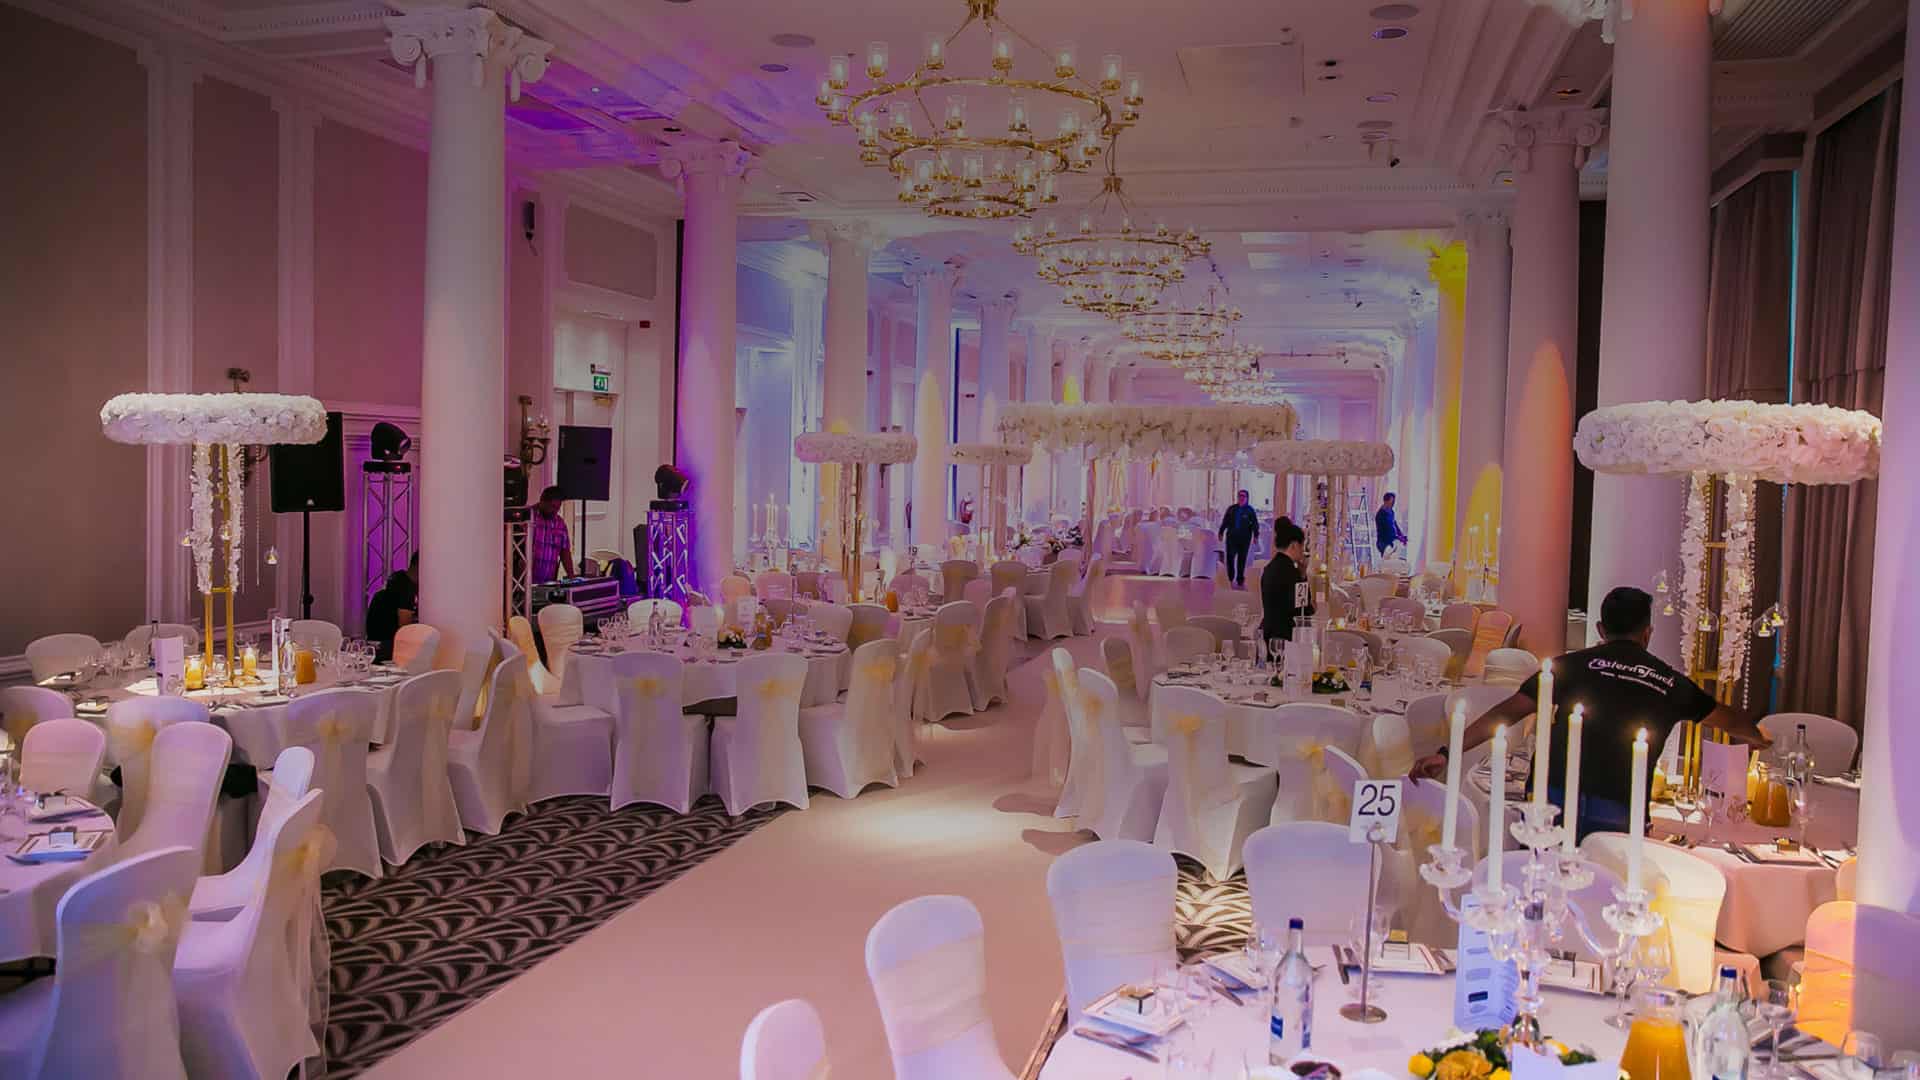 A large ballroom decorated for a wedding reception.